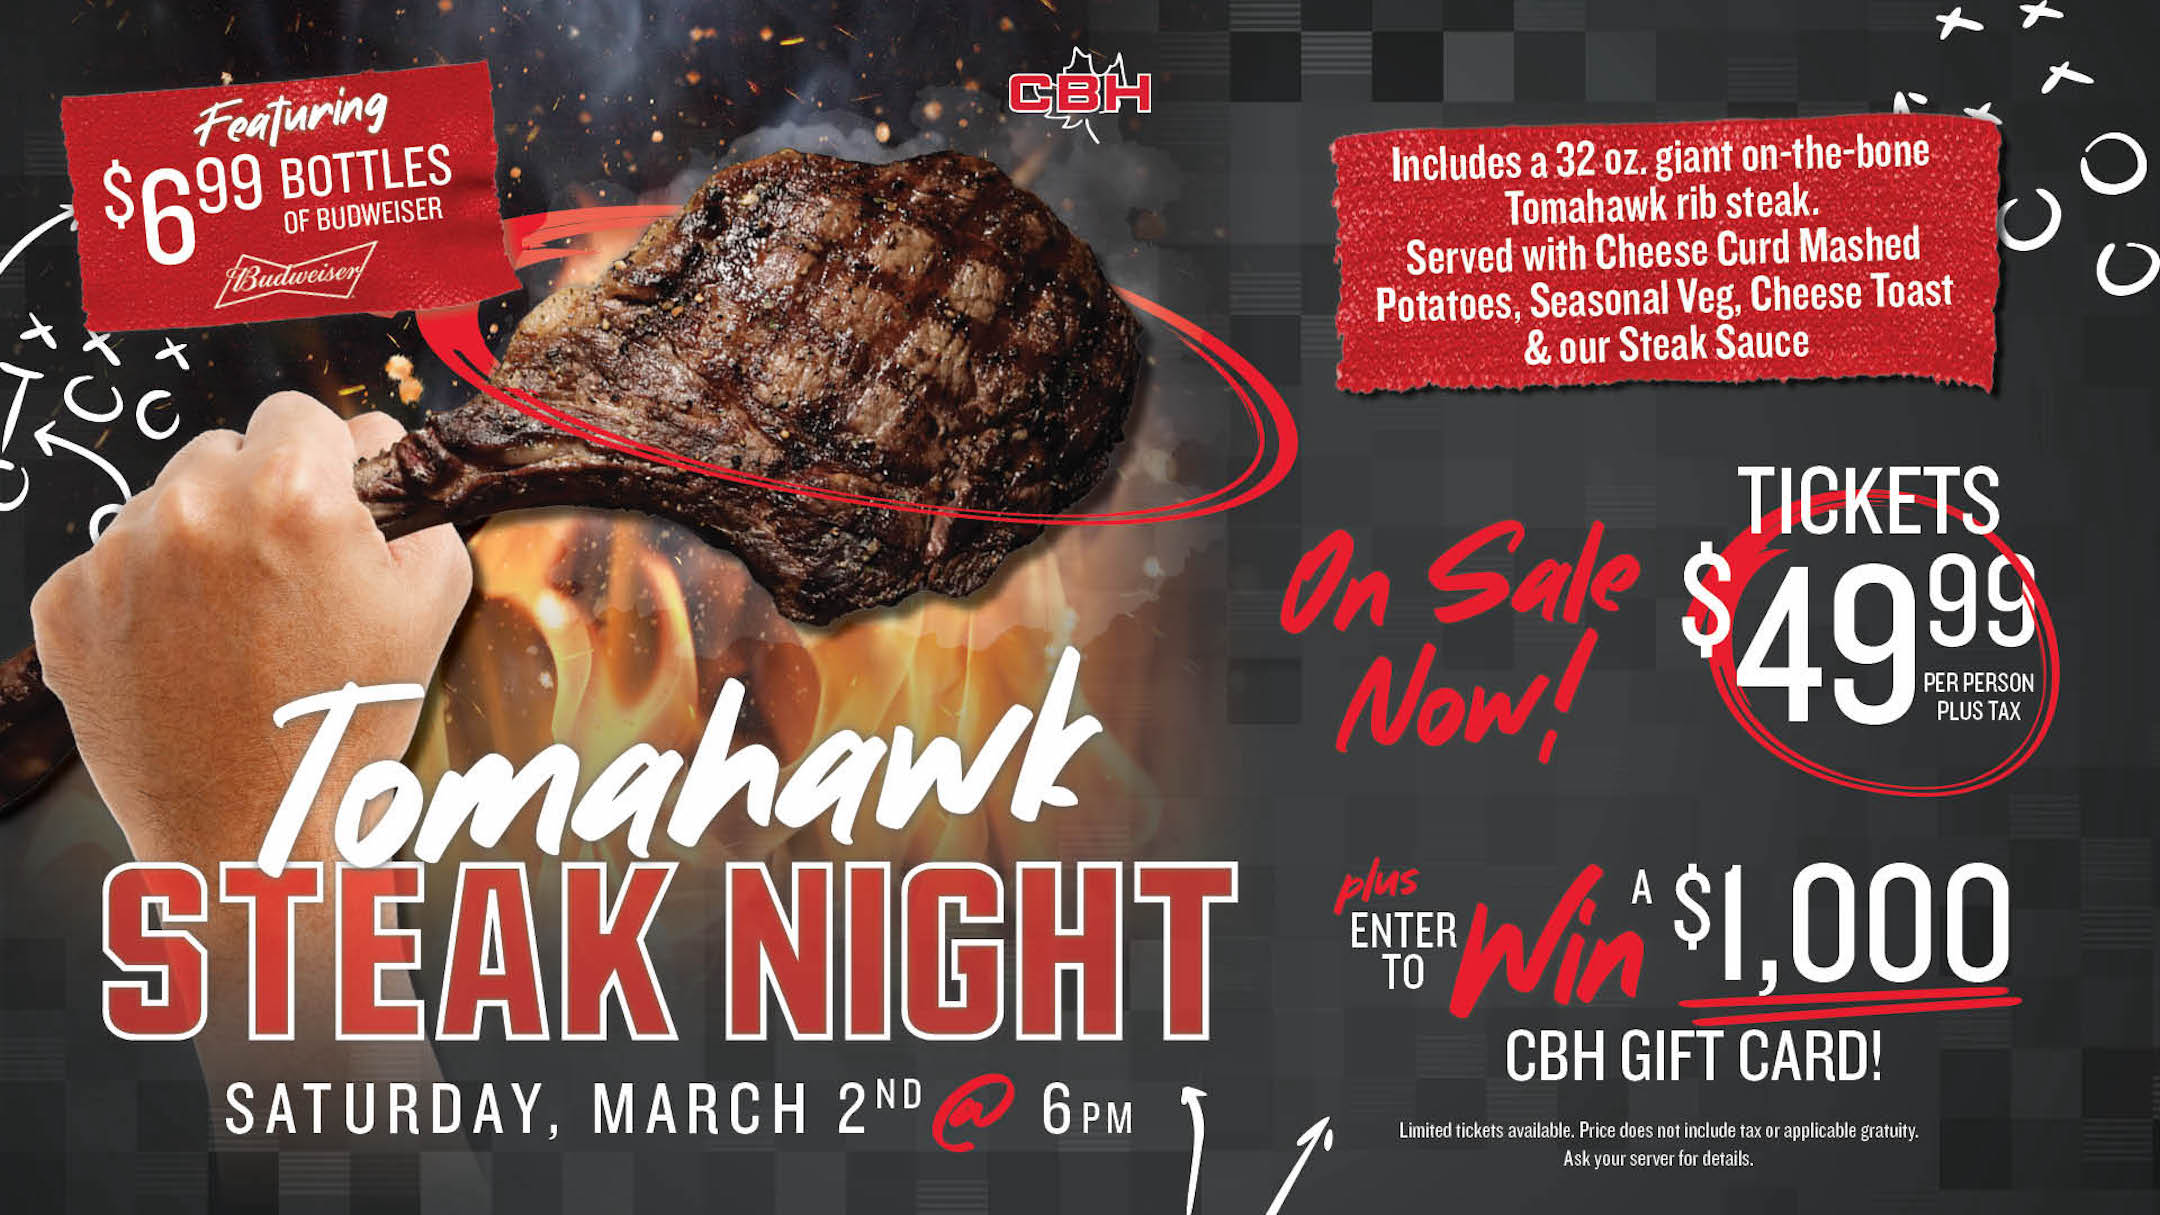 Tomahawk Steak Night - Saturday, March 2nd at 6pm. Tickets $49.99 per person plus tax, on sale now! Includes a 32oz giant on the bone tomahawk rib steak. Served with cheese curd mashed potatoes, seasonal veg, cheese toast & our steak sauce